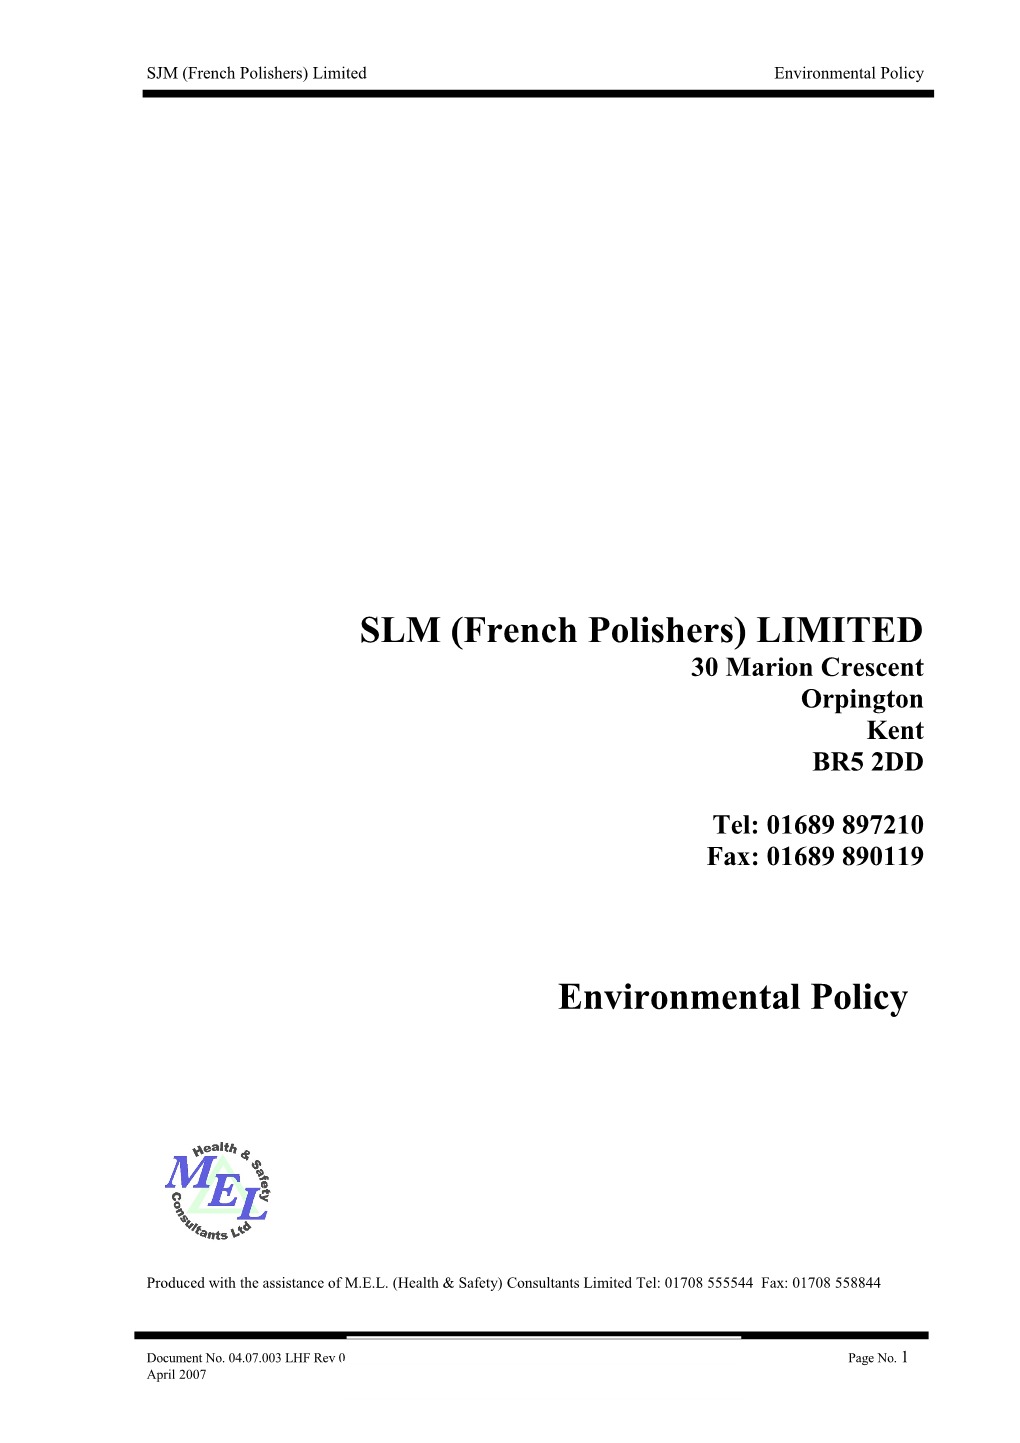 SJM (French Polishers) Limited Environmental Policy